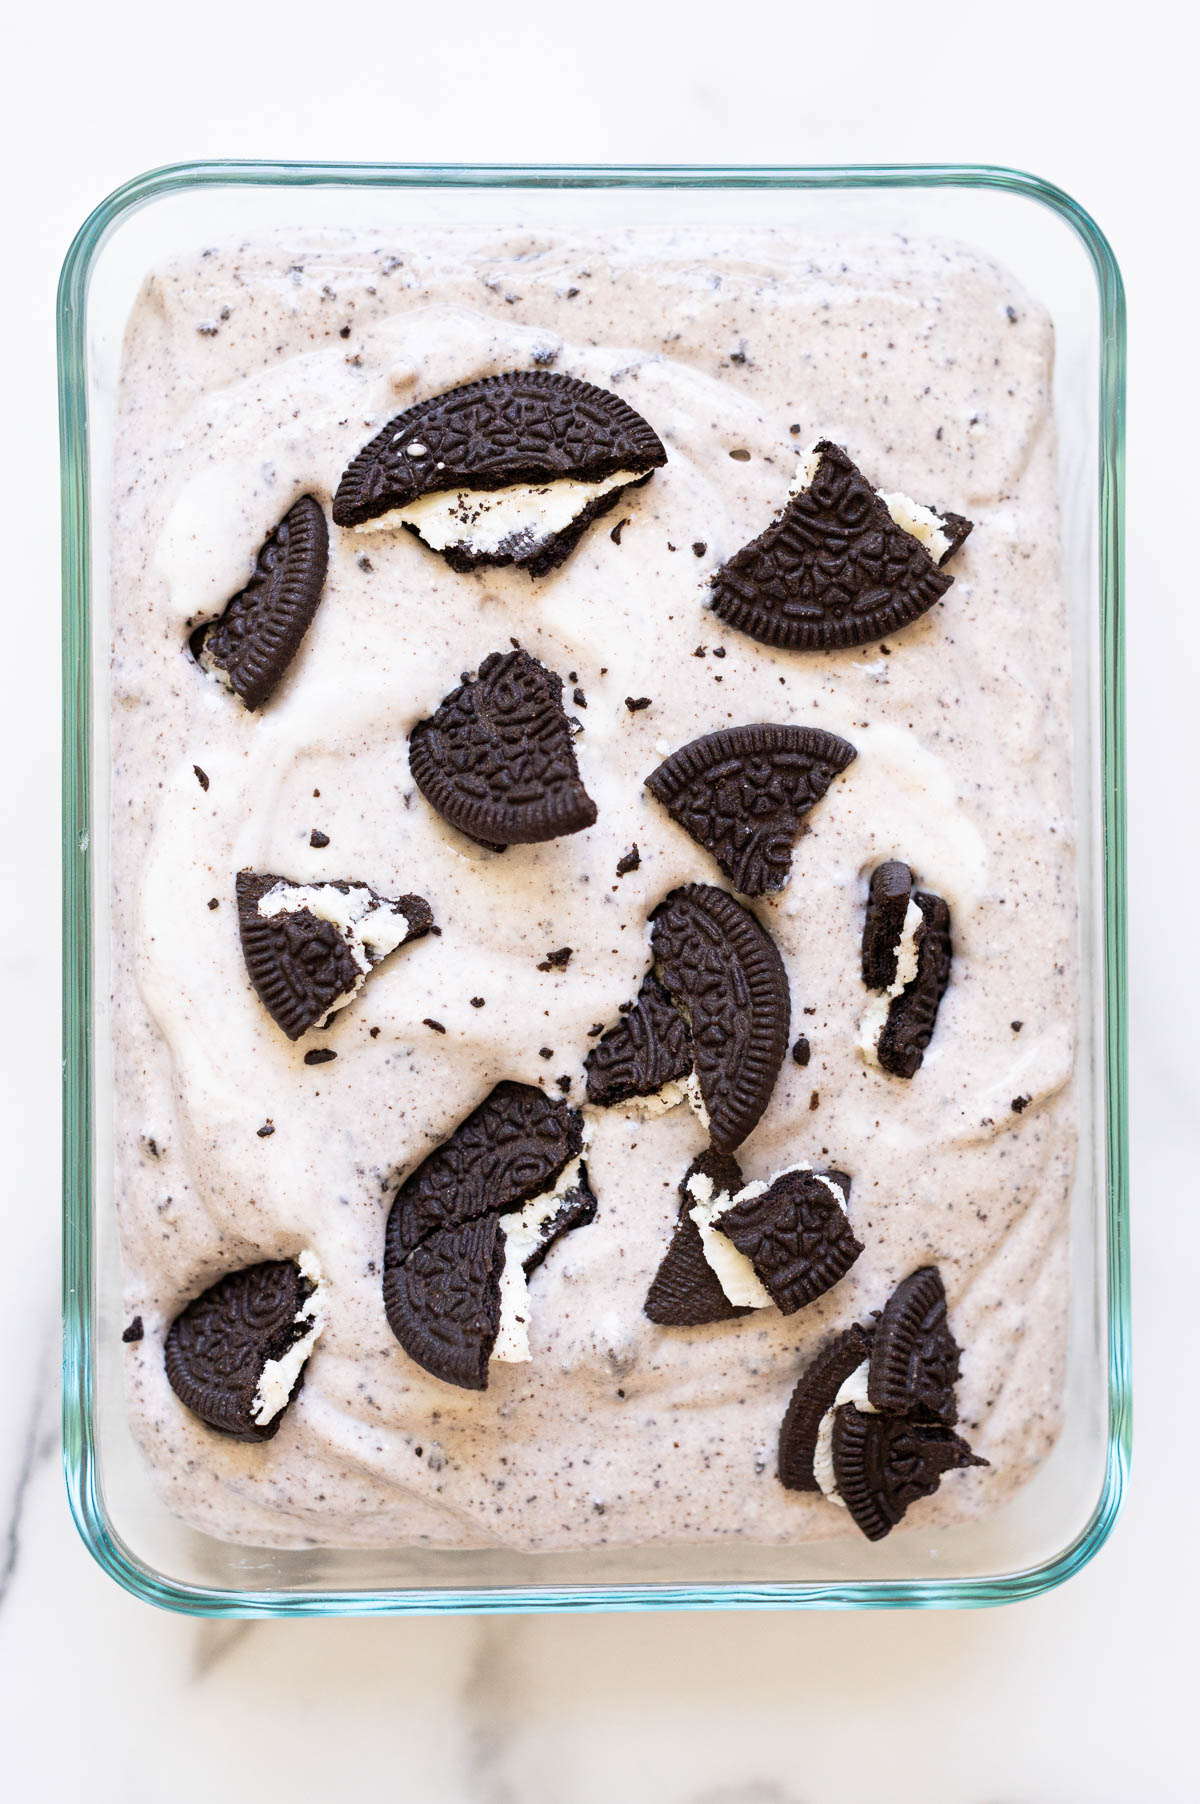 Cookies and cream cottage cheese ice cream topped with Oreo cookies in a glass container.